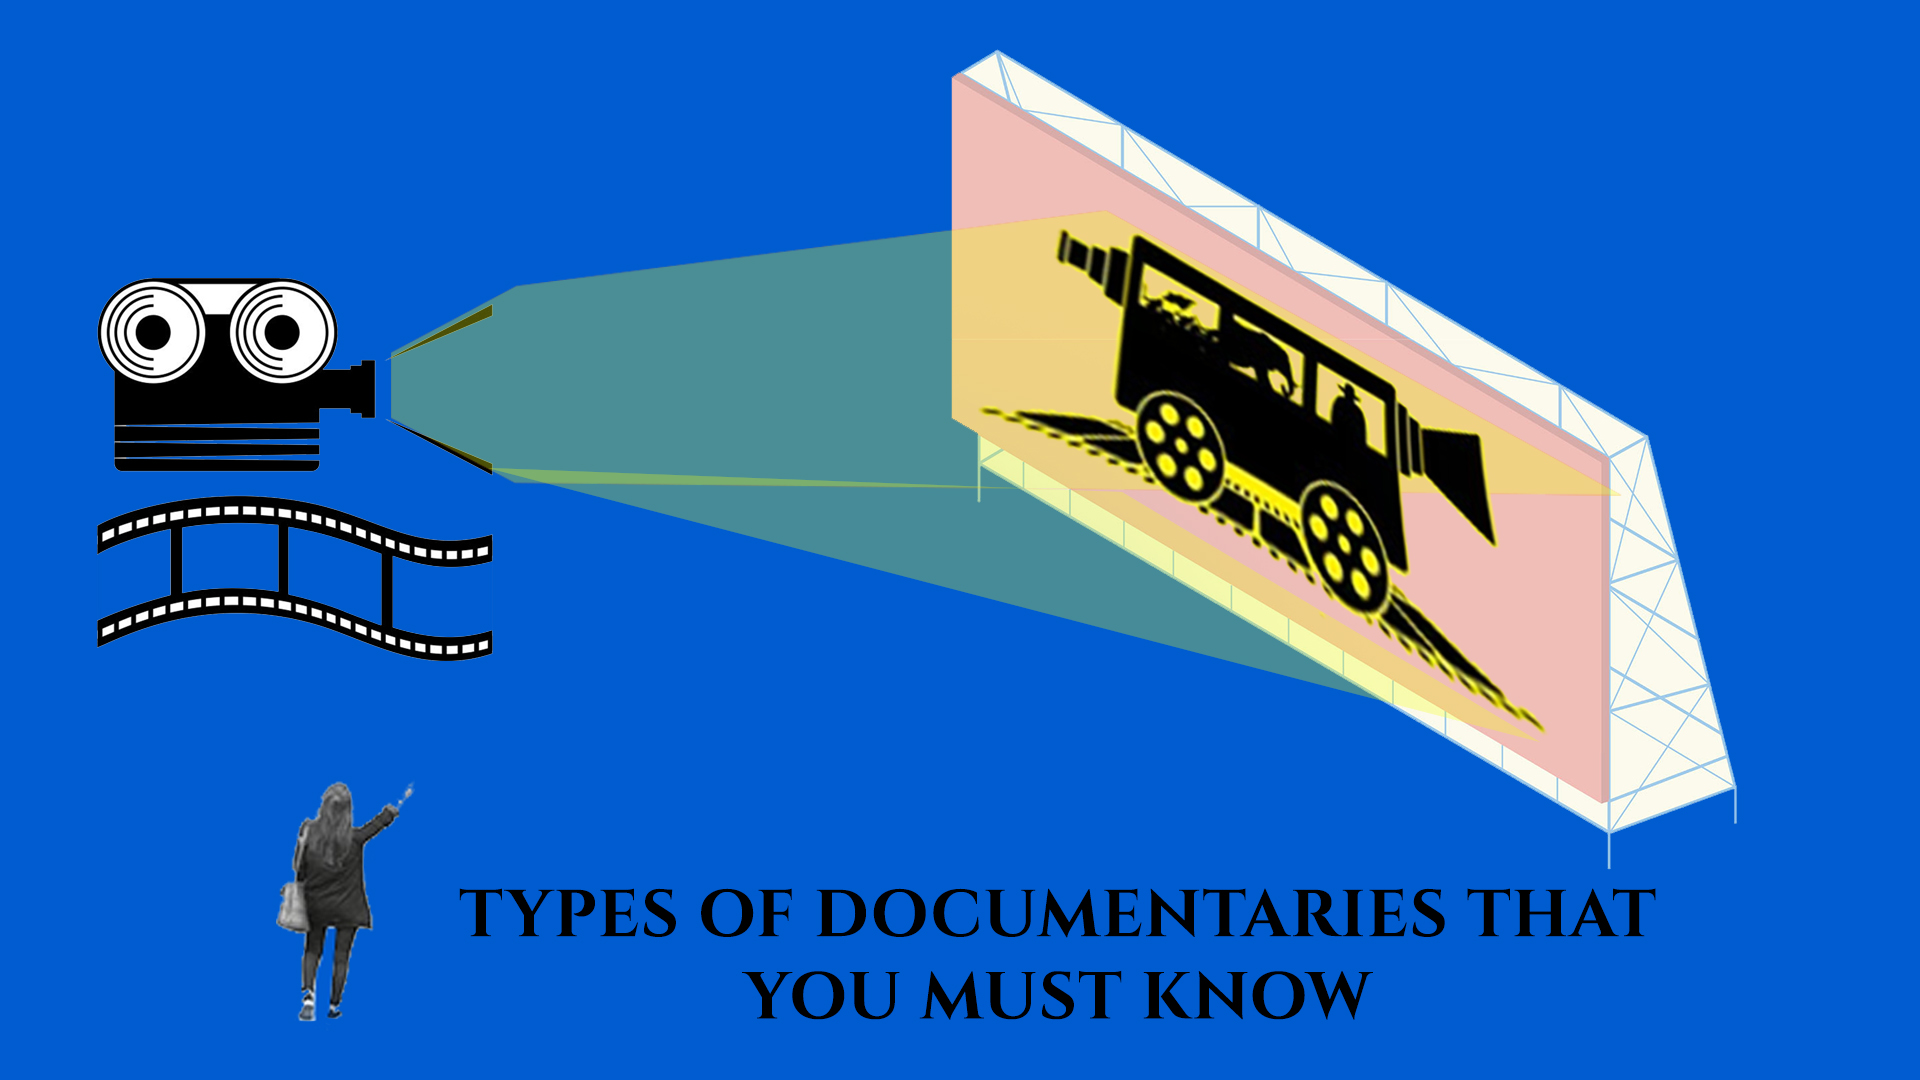 TYPES OF DOCUMENTARIES THAT YOU MUST KNOW